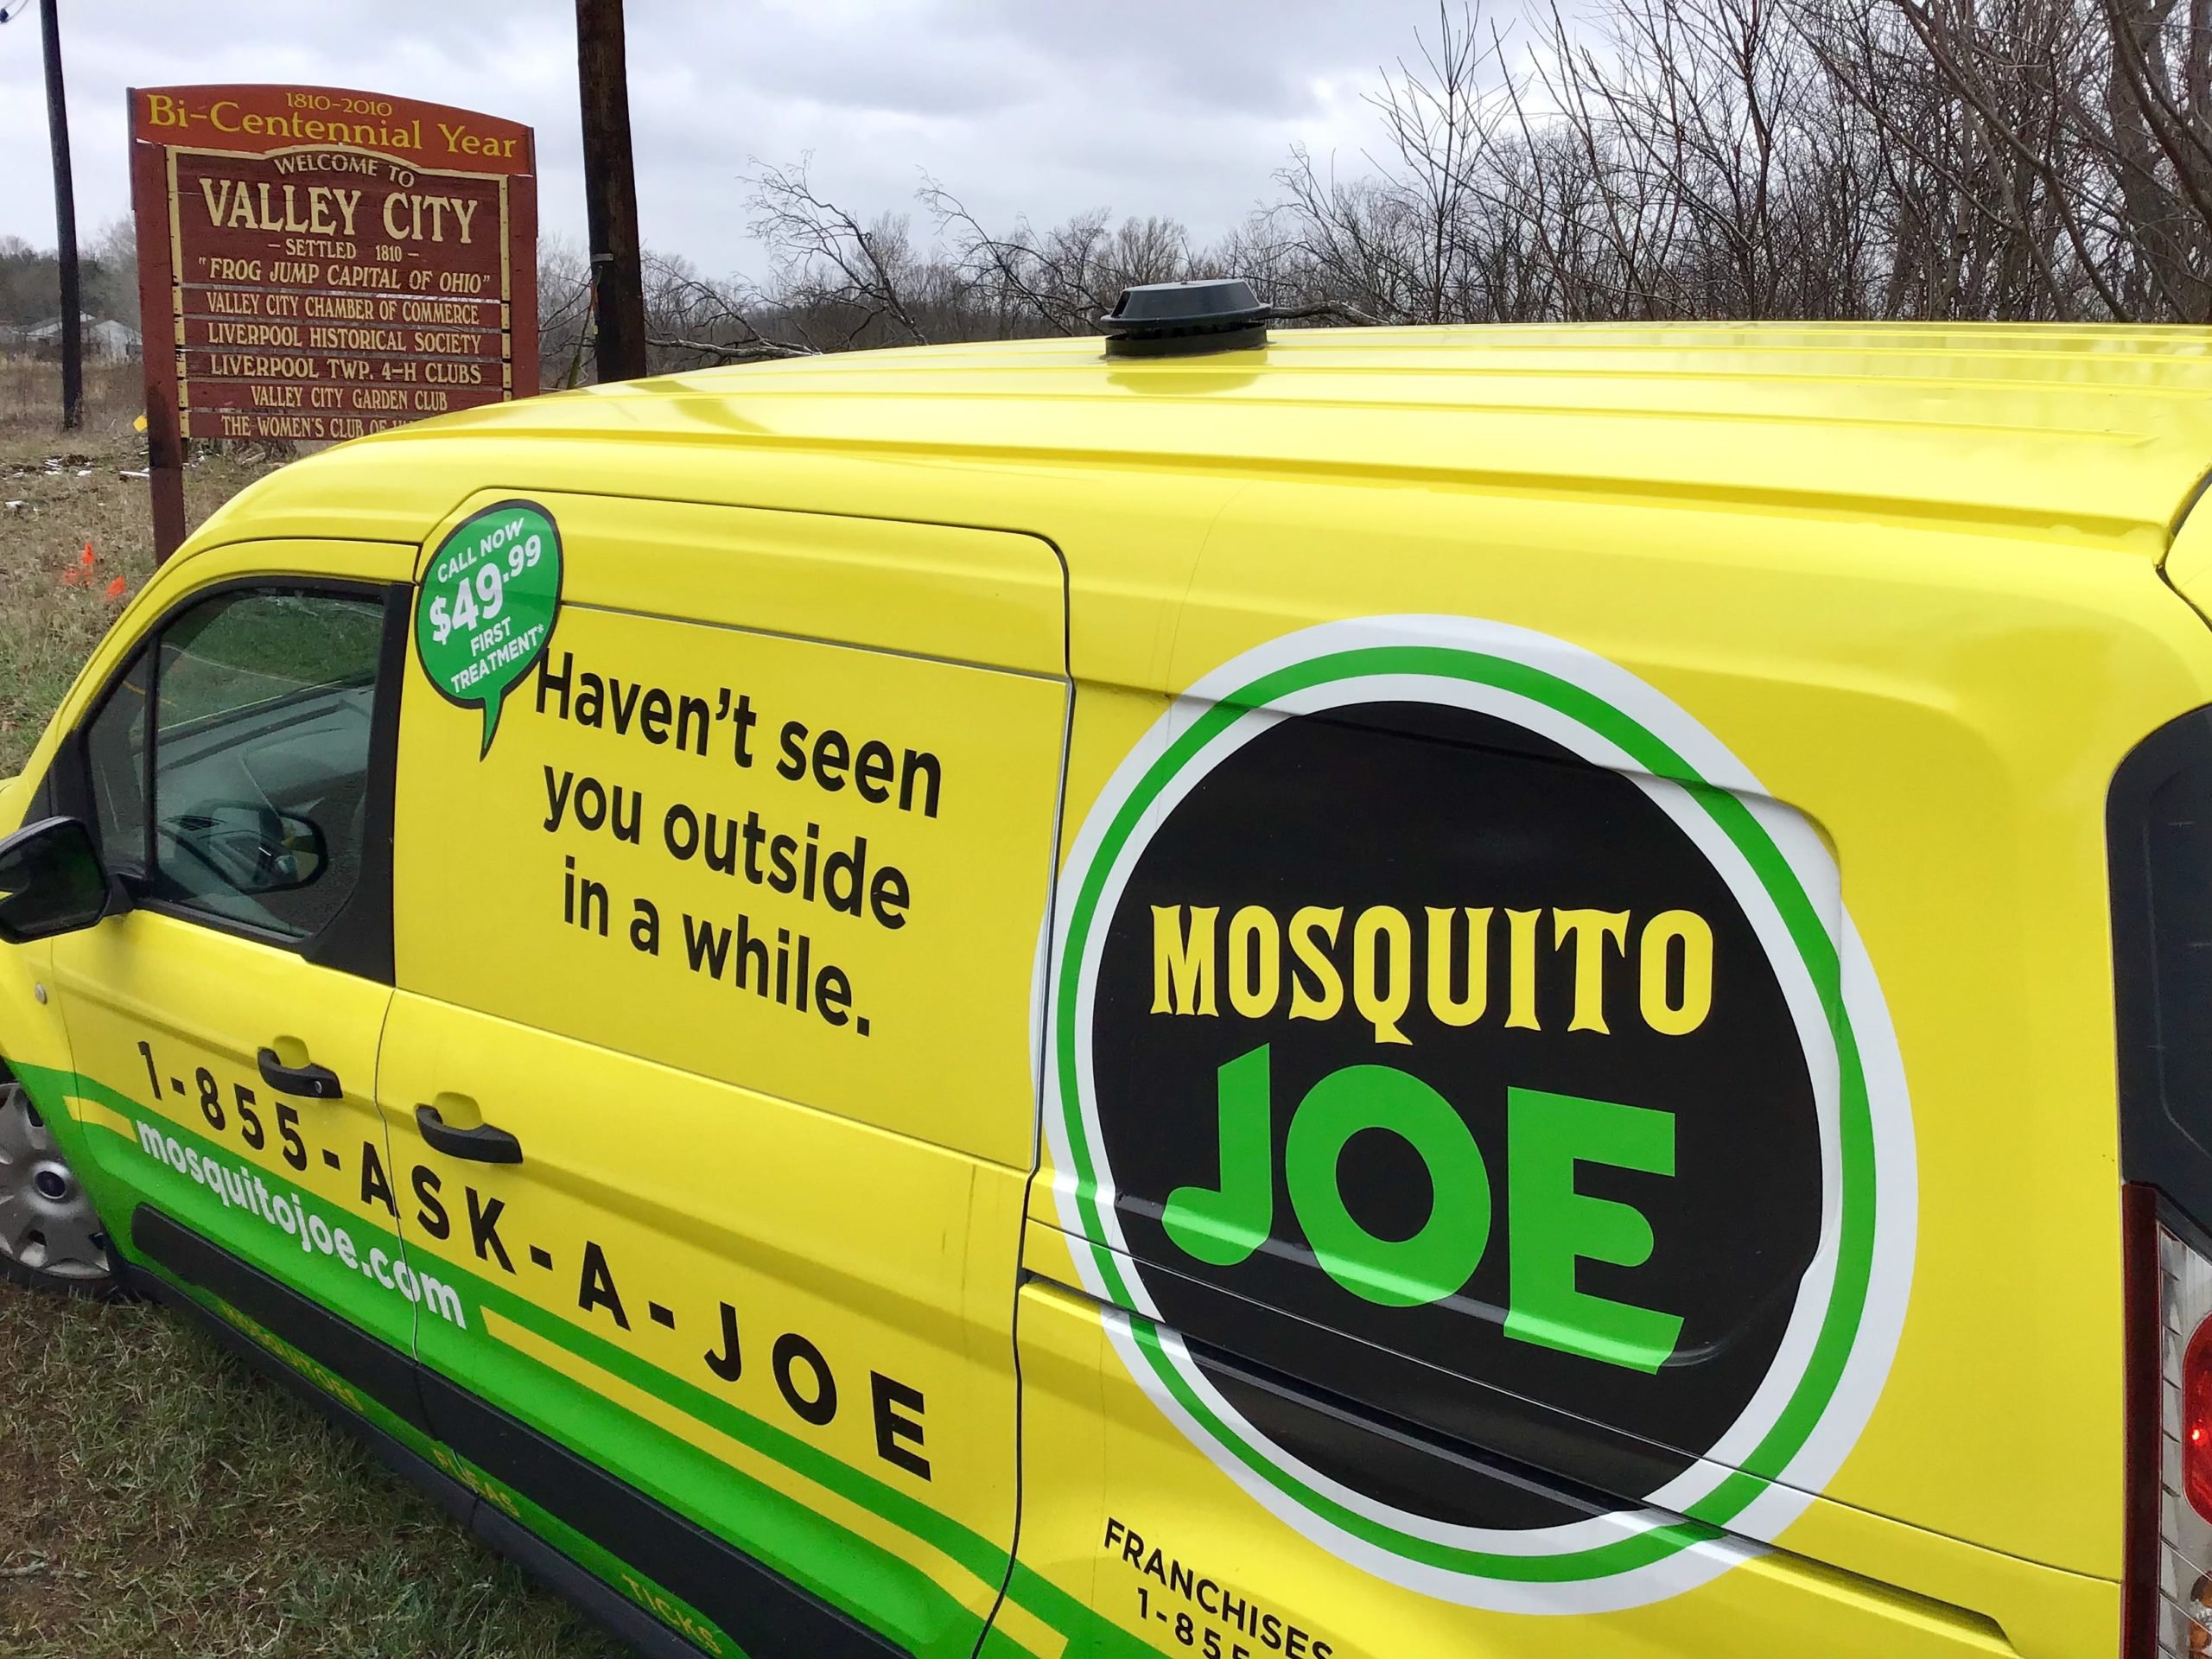 A yellow and green Mosquito Joe service vehicle is parked near a Valley City sign in Medina, Ohio.